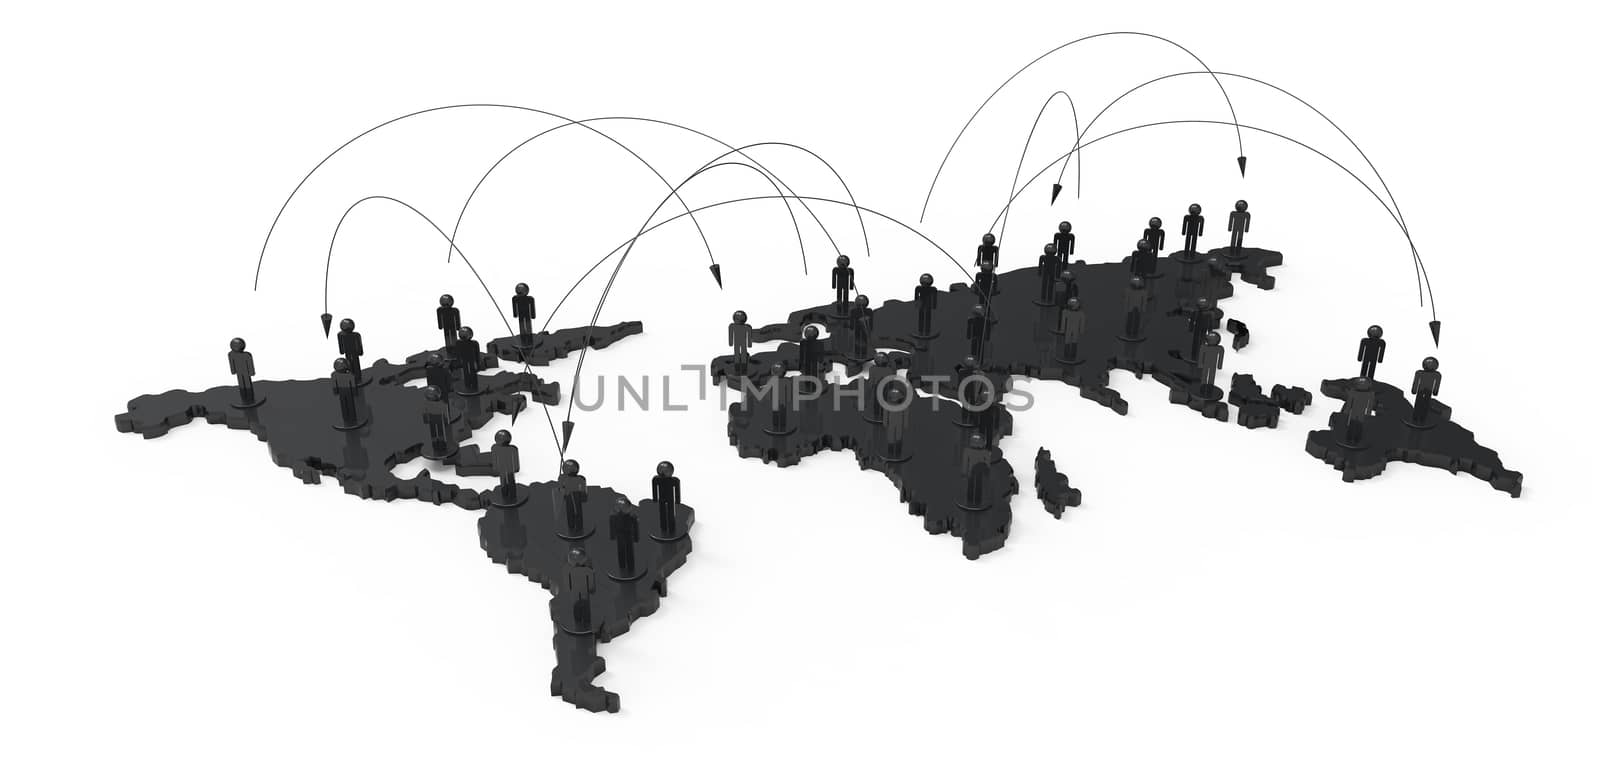 social network human 3d on world map  by everythingpossible